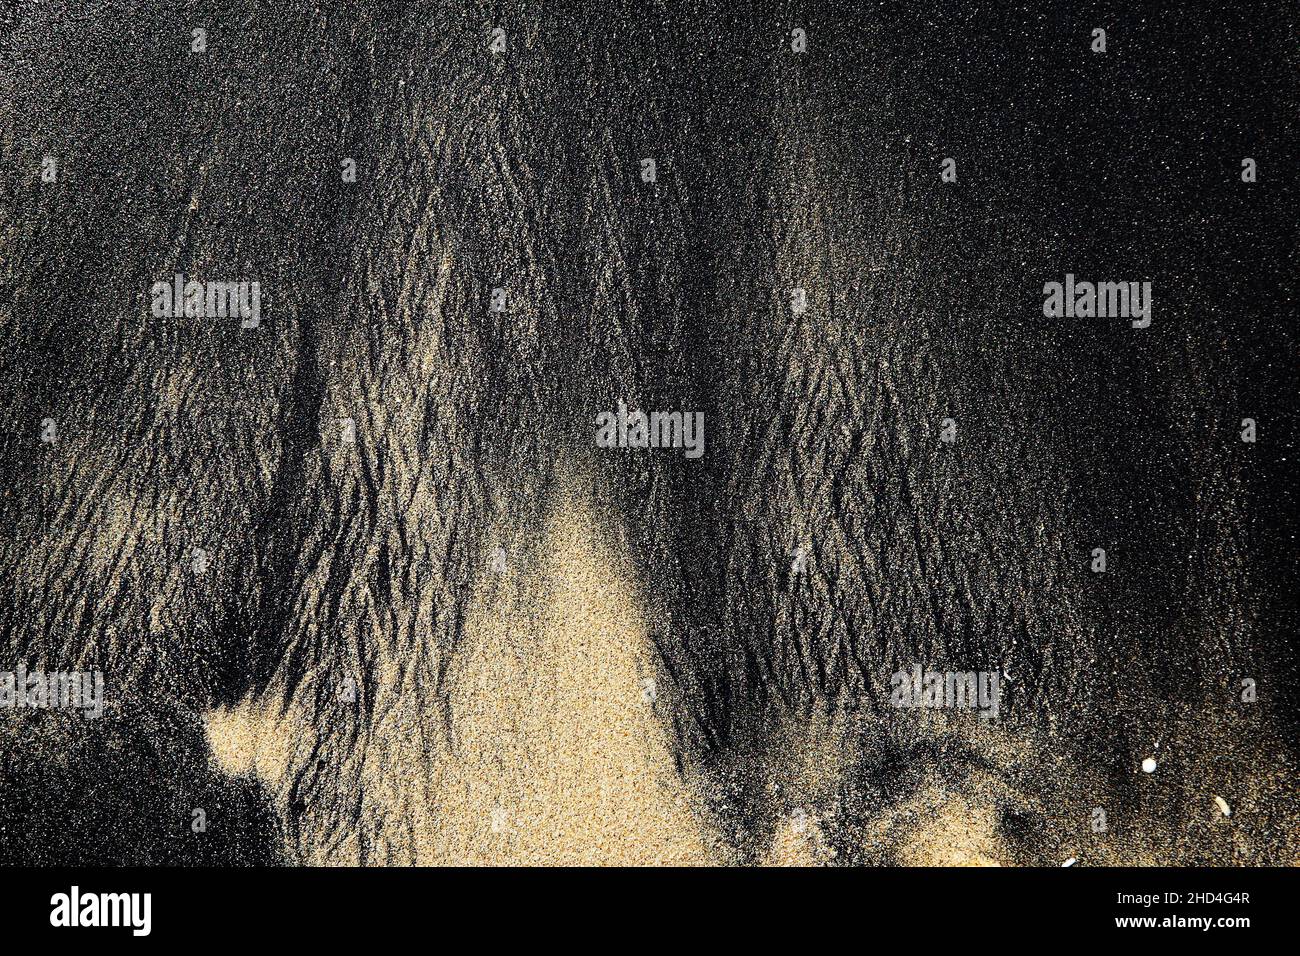 Abstract pattern made by waves on volcanic black sand of Bali island Stock Photo